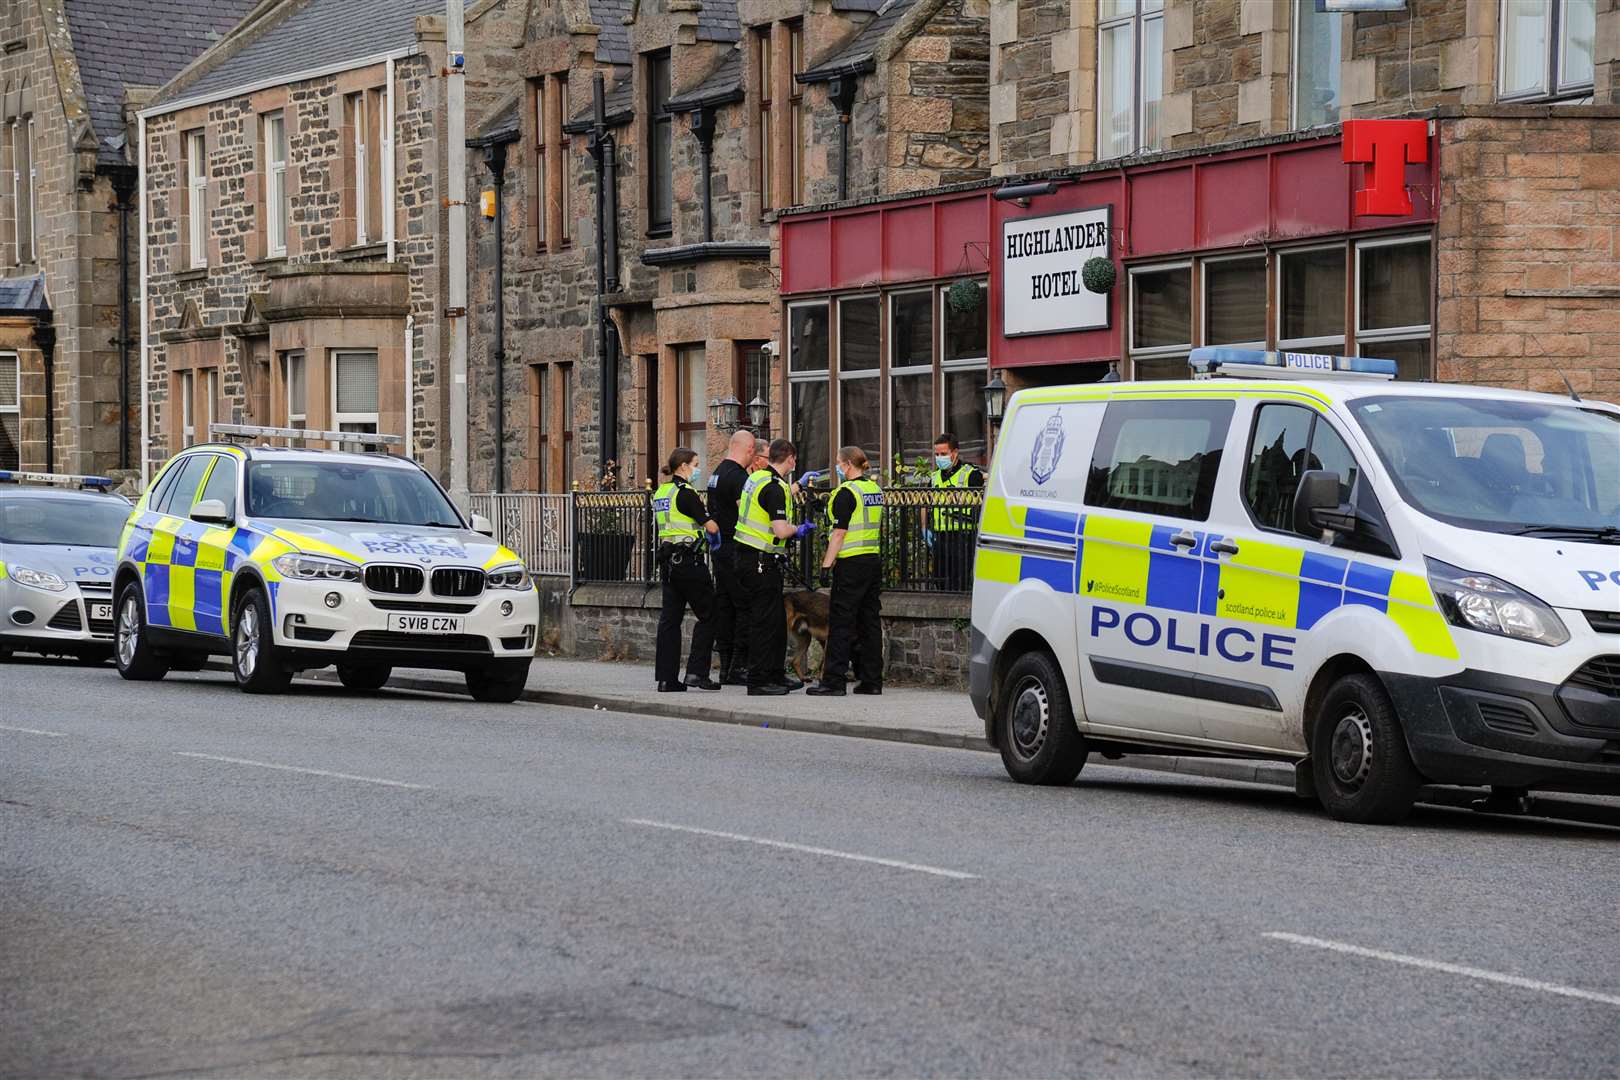 Police swoop on the Highlander Hotel in September 2020. Picture: Eric Cormack